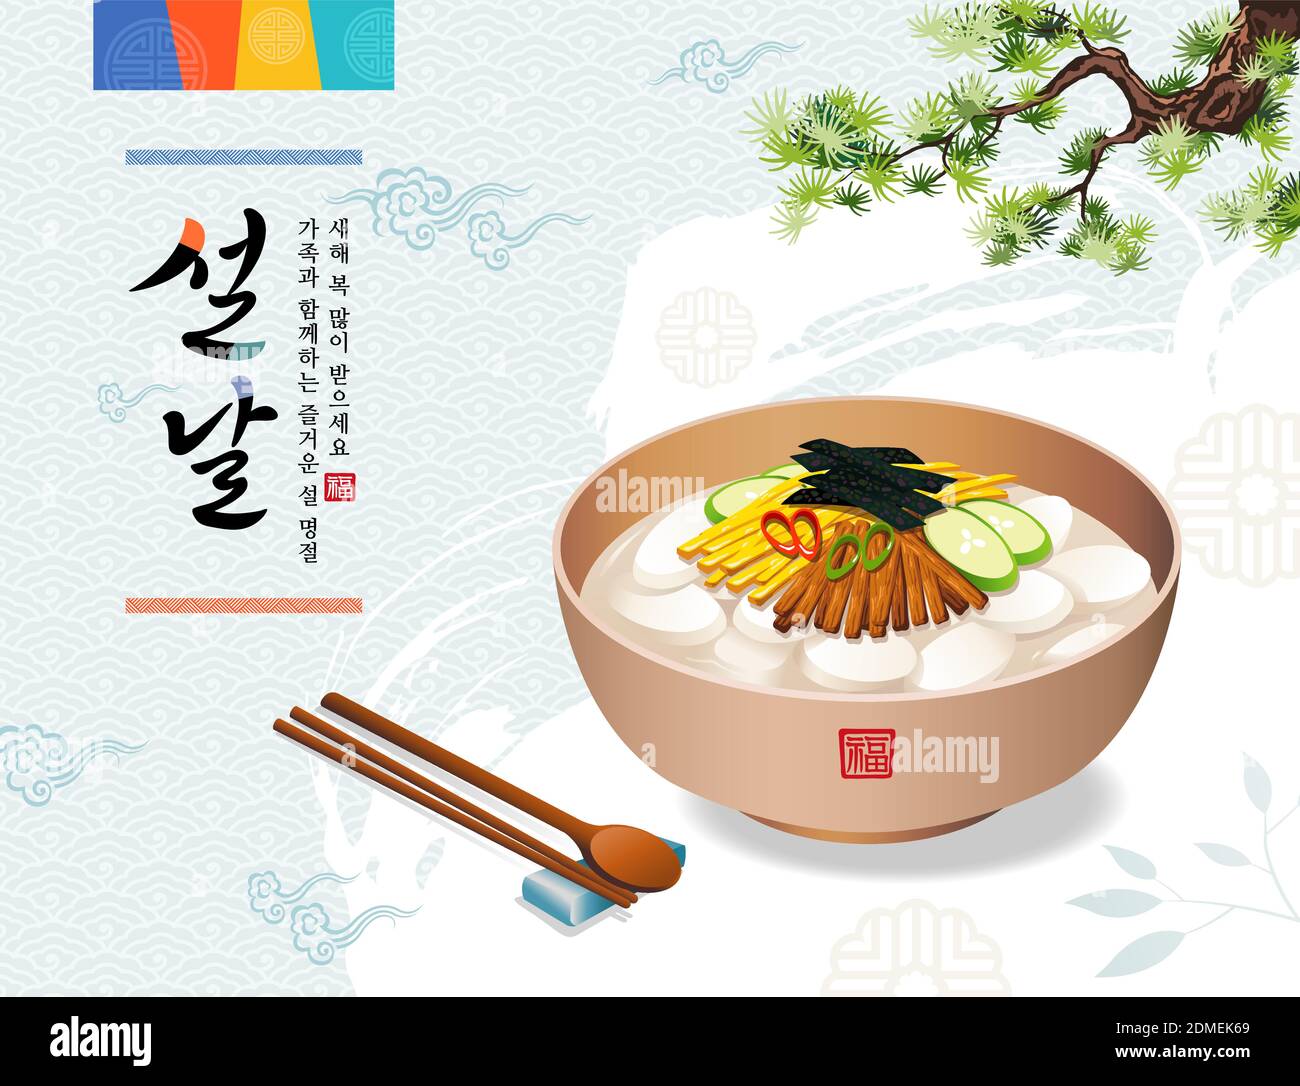 Korean New Year. Traditional holiday food, rice cake soup. Happy holidays with family, Happy New Year, Korean text translation. Stock Vector